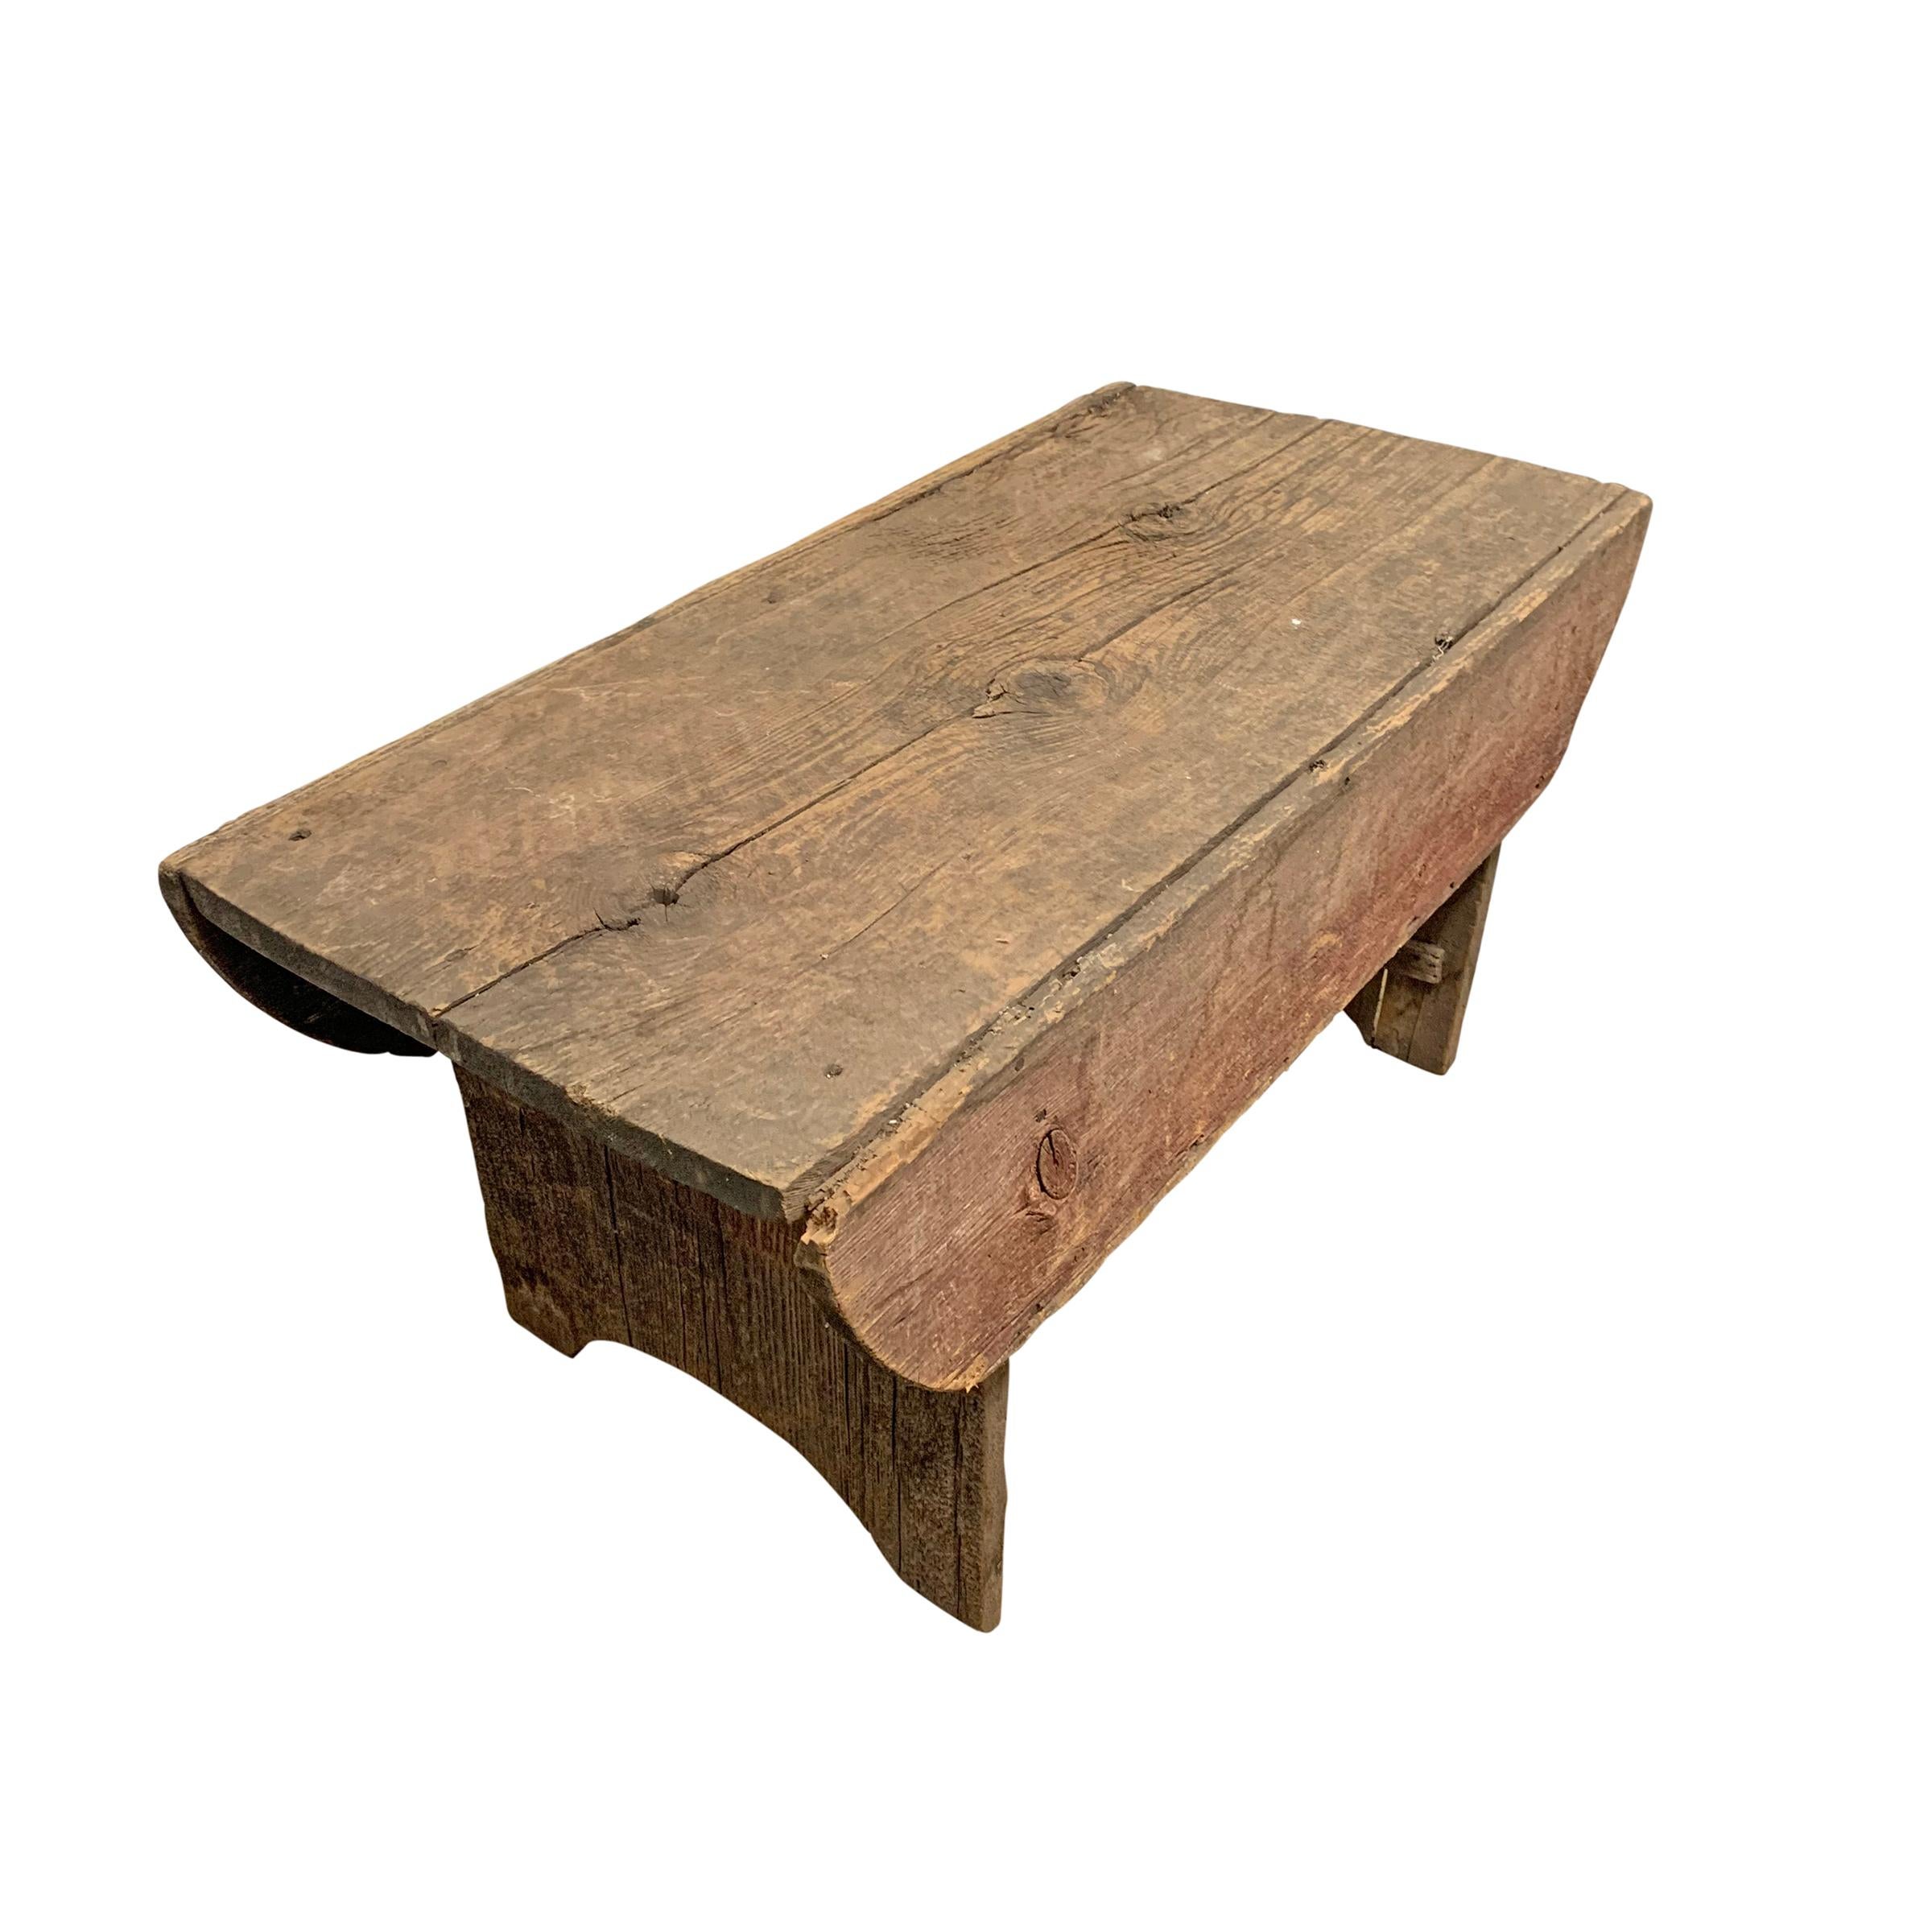 19th Century Early American Primitive Bench